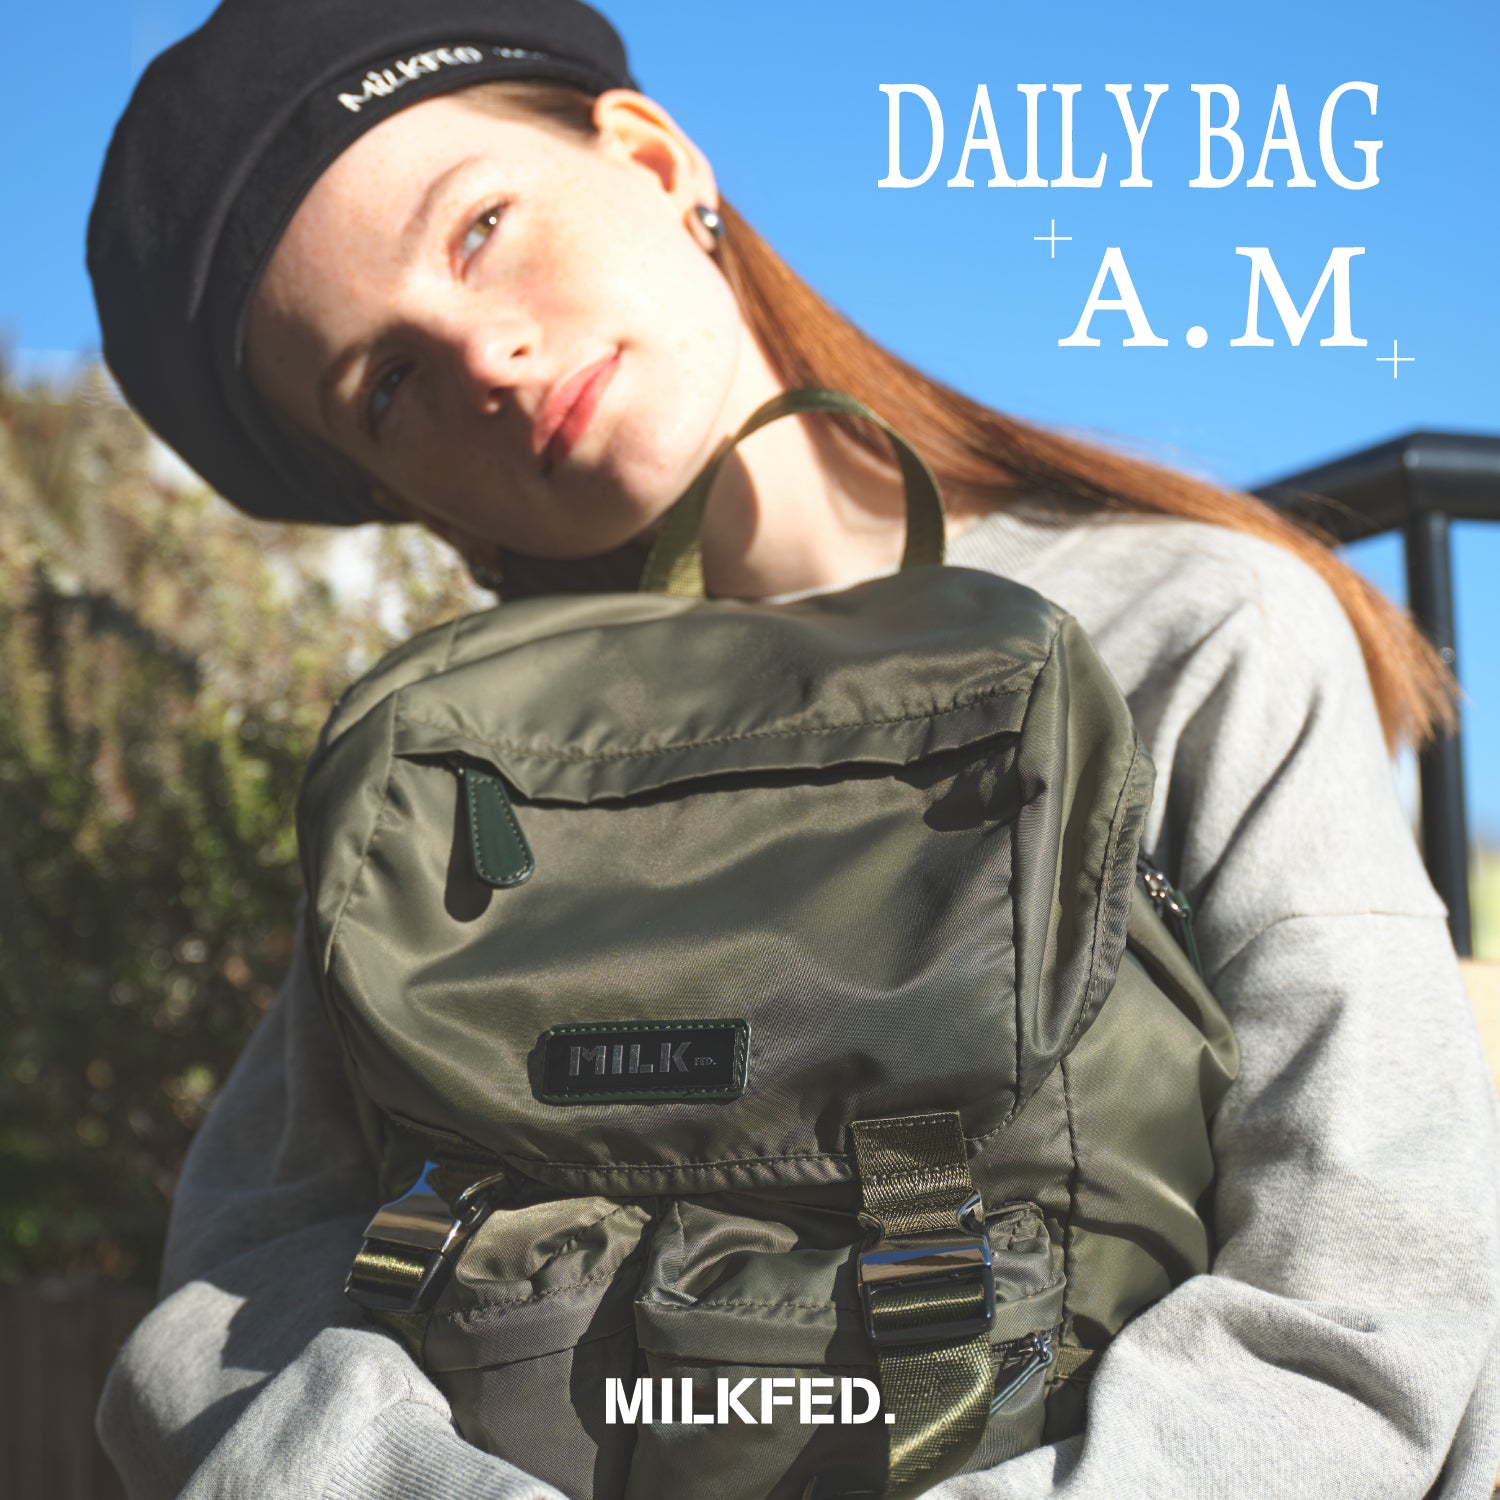 NEW BAG COLLECTION " A.M. "